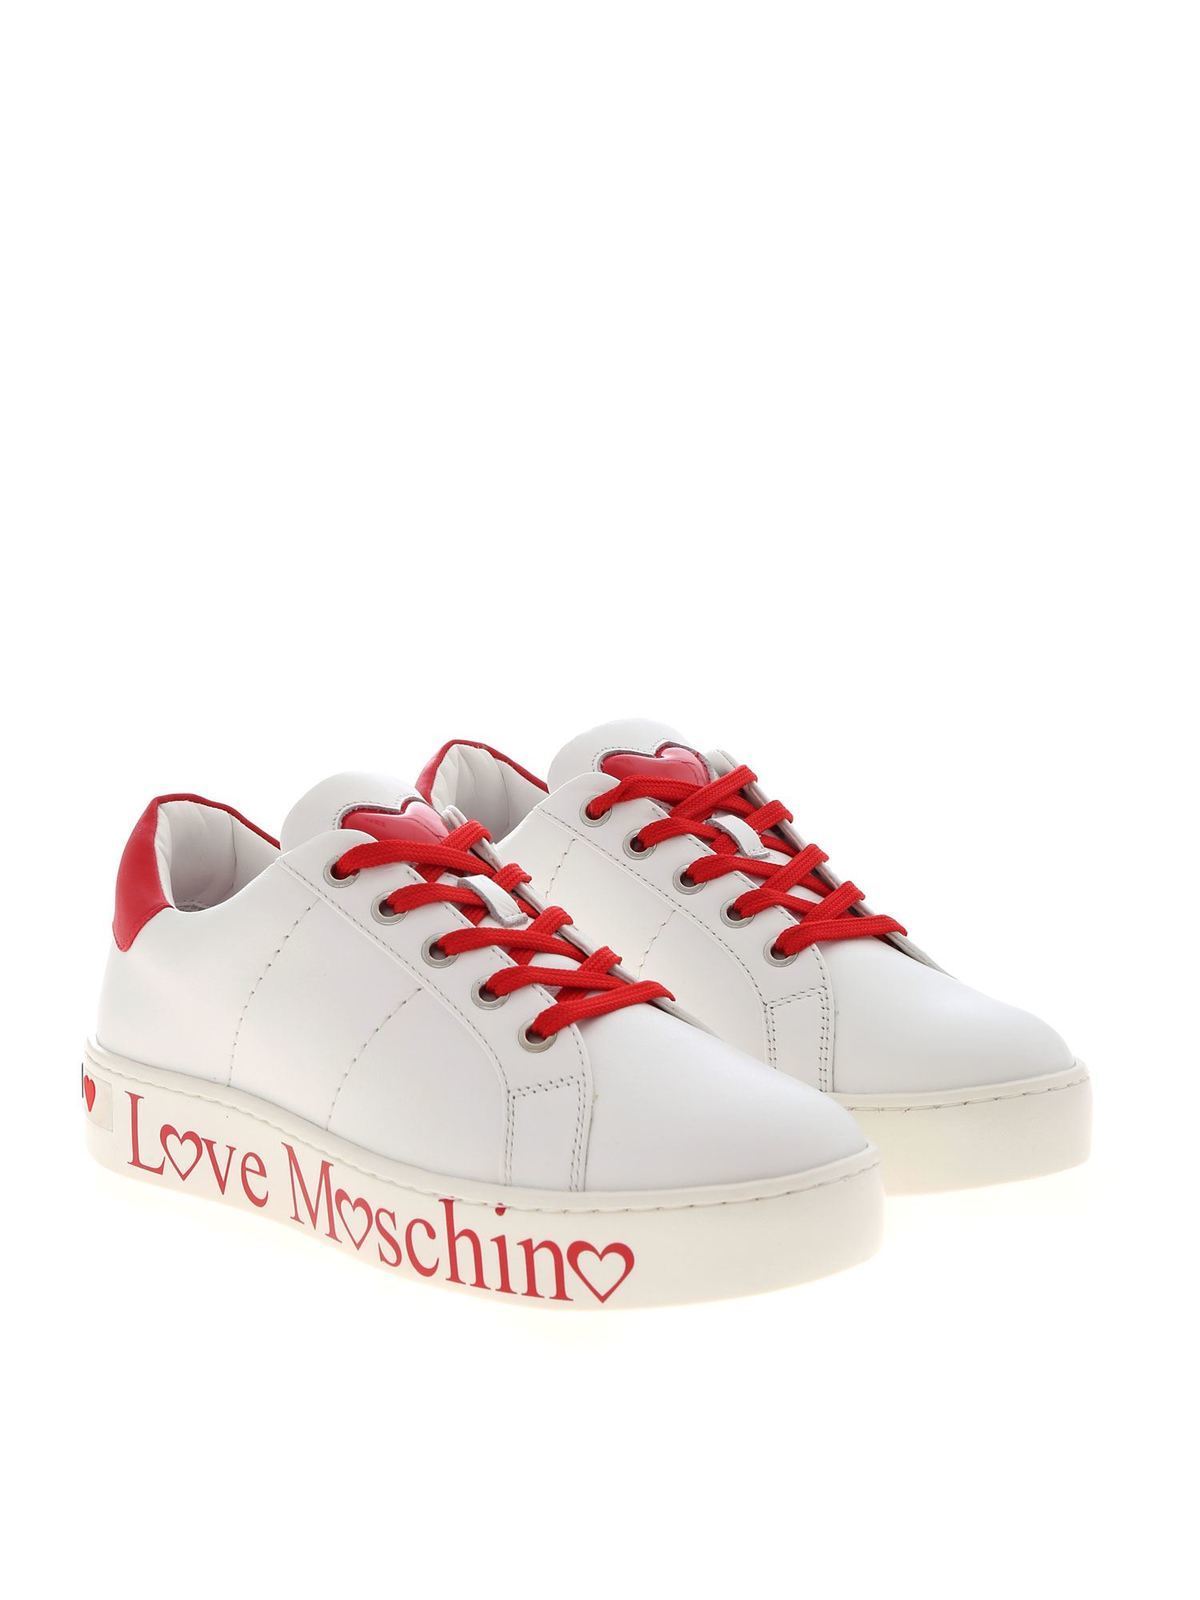 Trainers Love Moschino - Logo print sneakers in white and red 